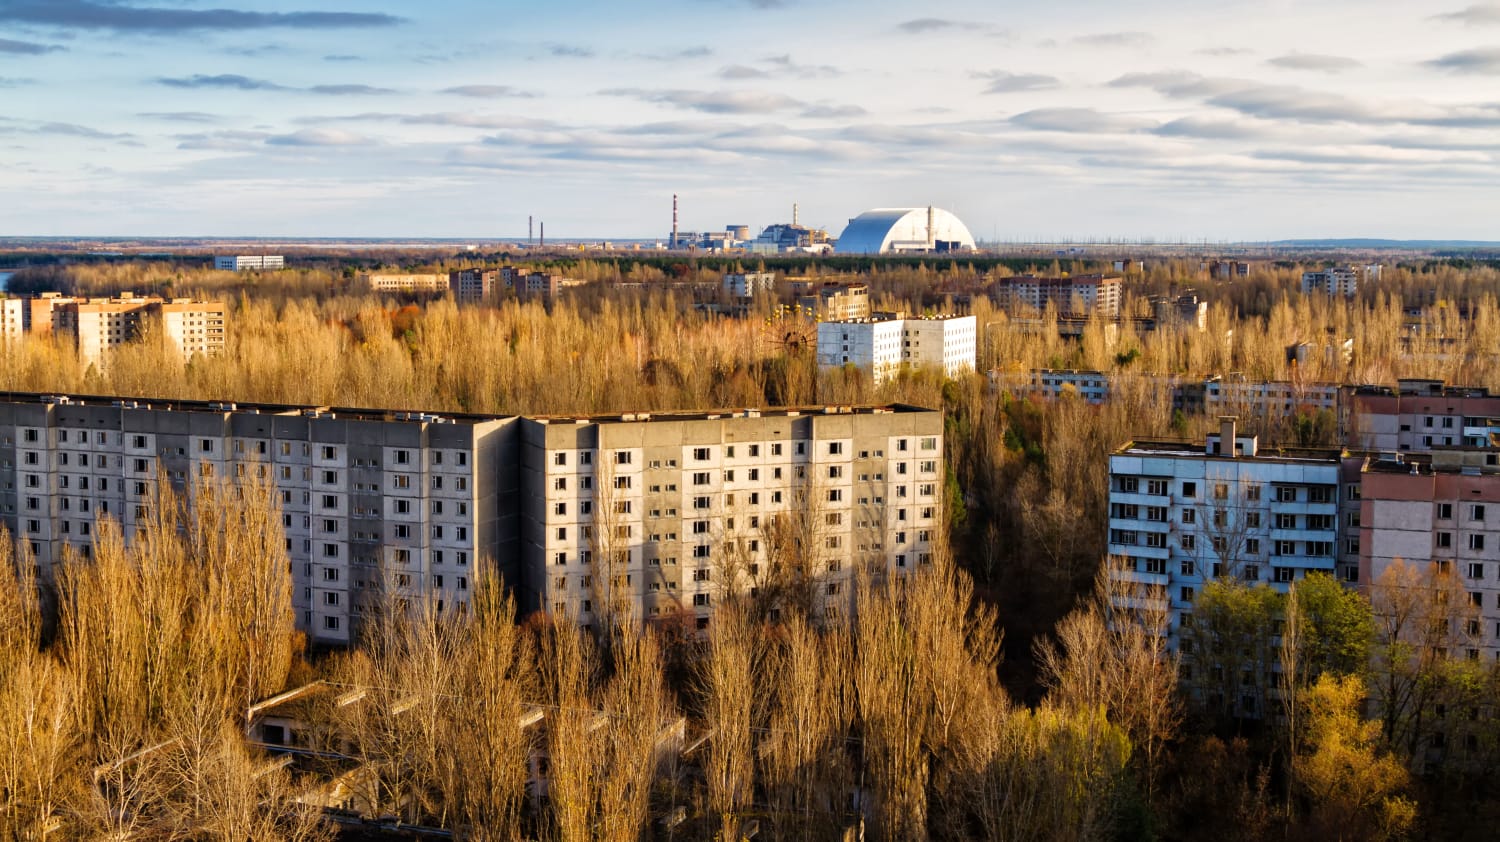 Chernobyl Will Soon Be More Accessible to Tourists, Ukraine Says